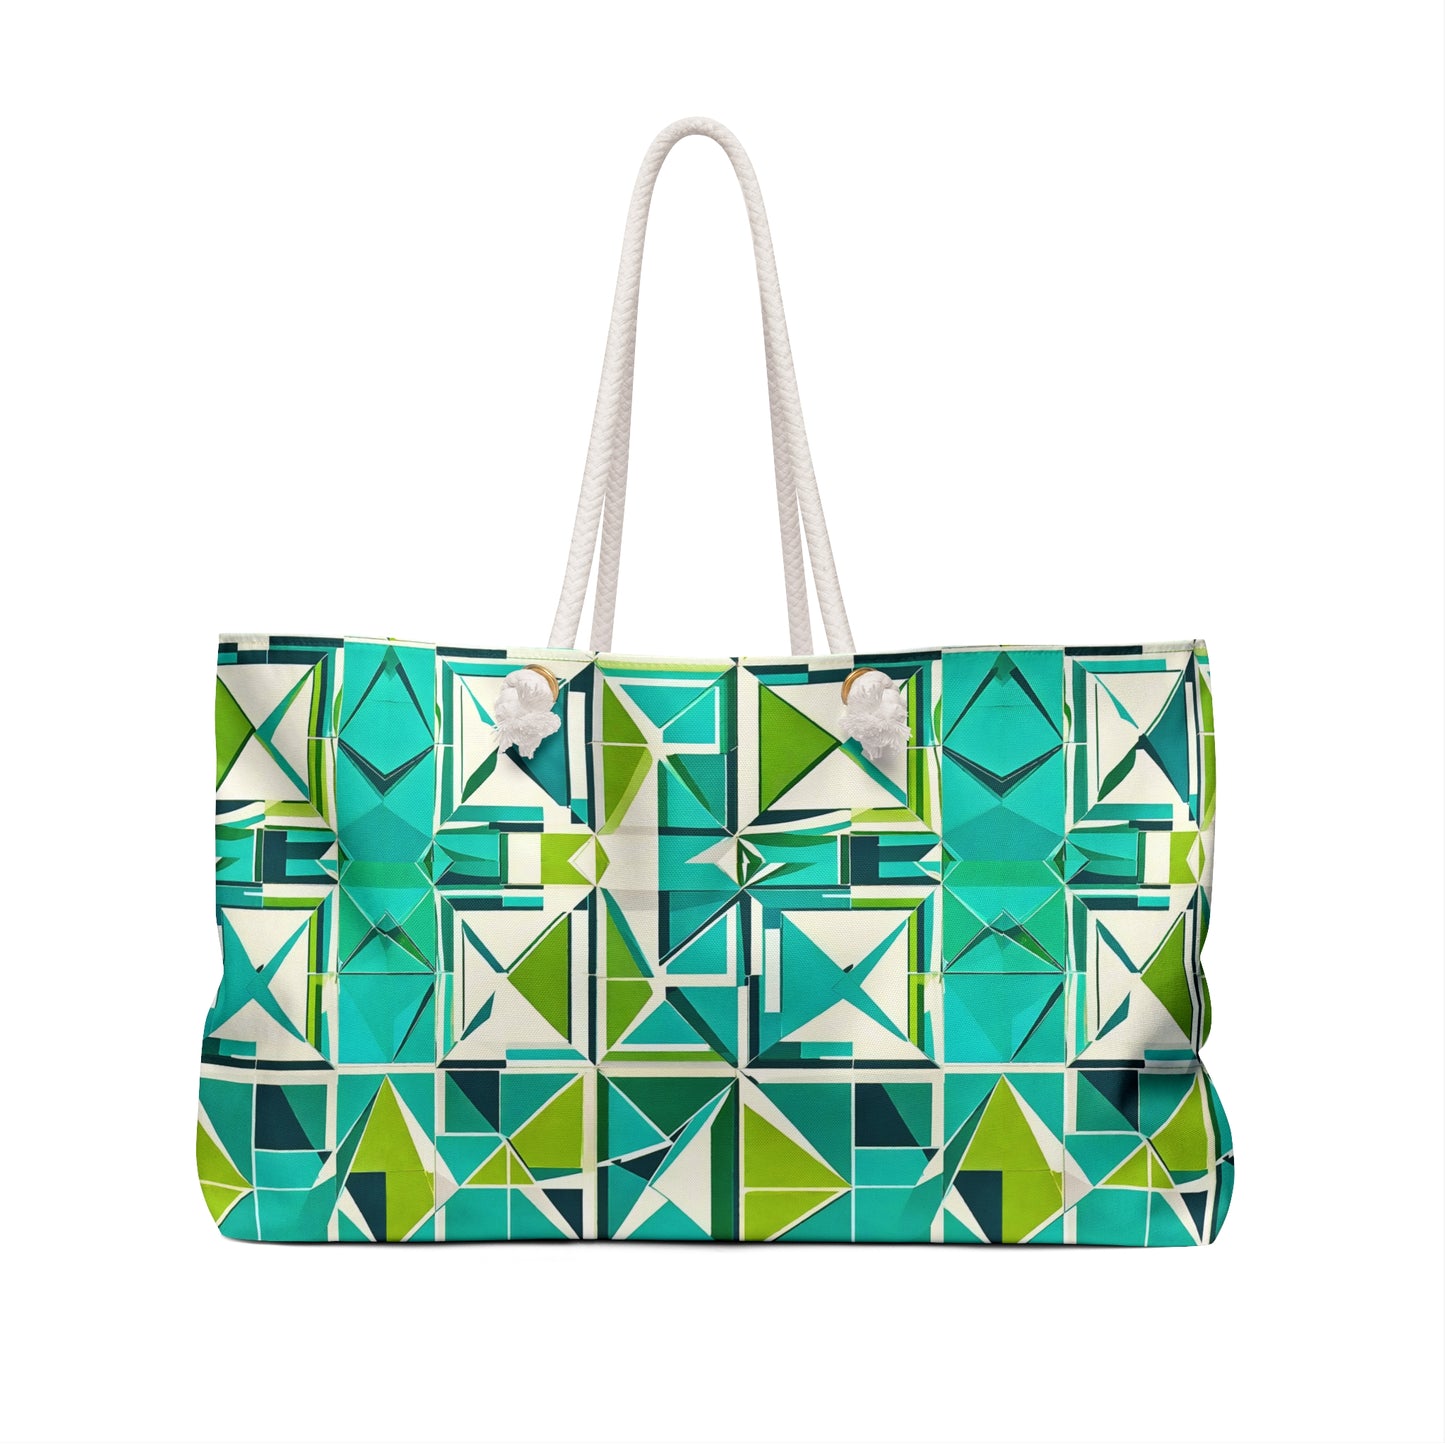 Midcentury Modern Cancun Vacation Tile Turquoise and Green Geometric Pattern Shopper Travel Market Beach Weekender Bag